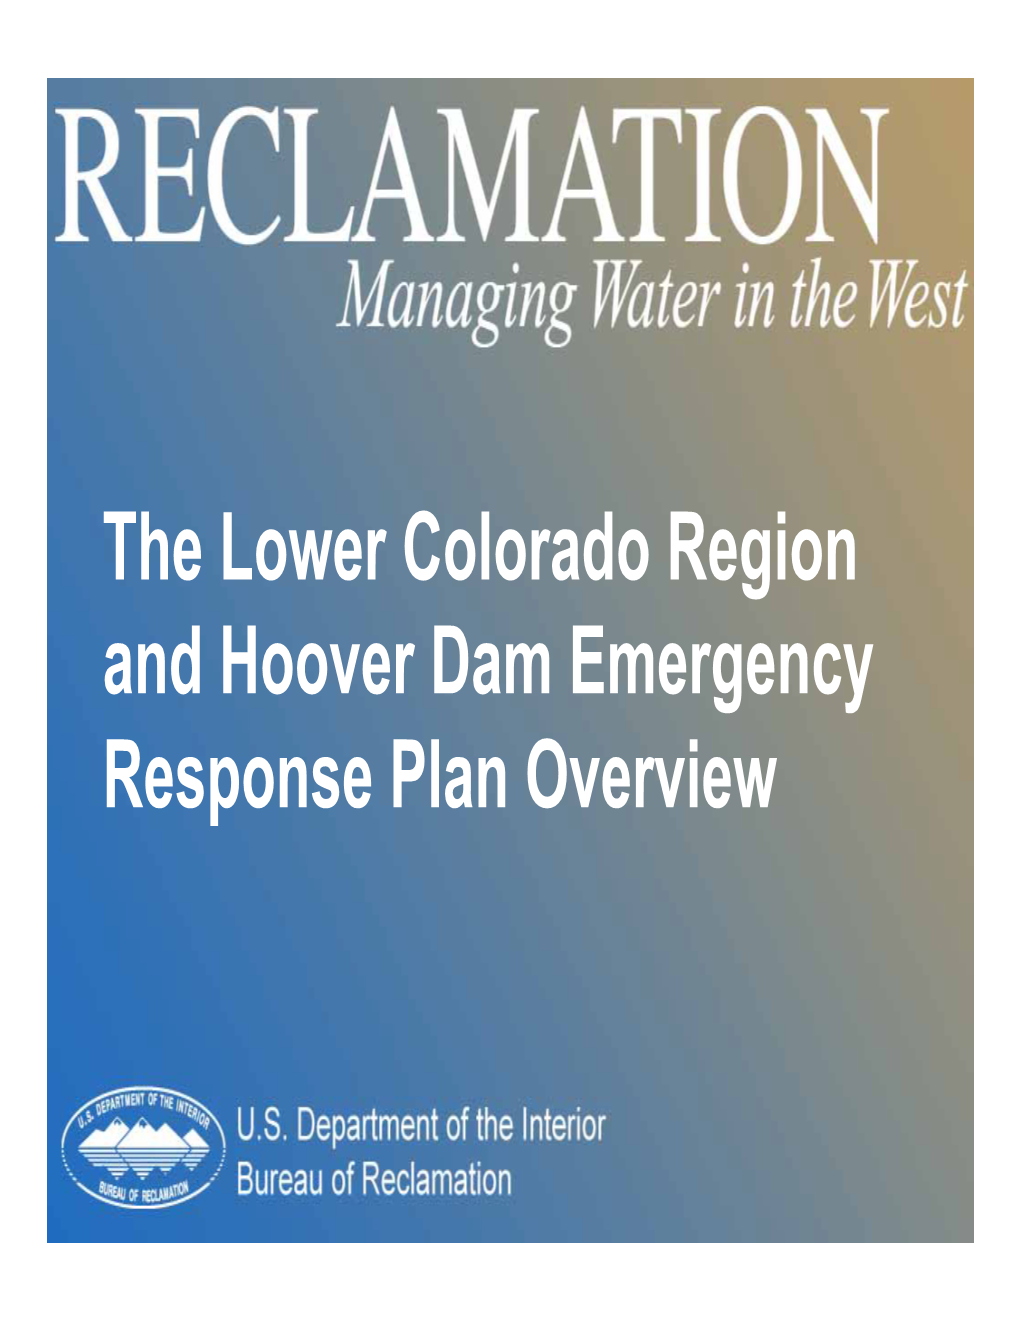 The Lower Colorado Region and Hoover Dam Emergency Response Plan Overview